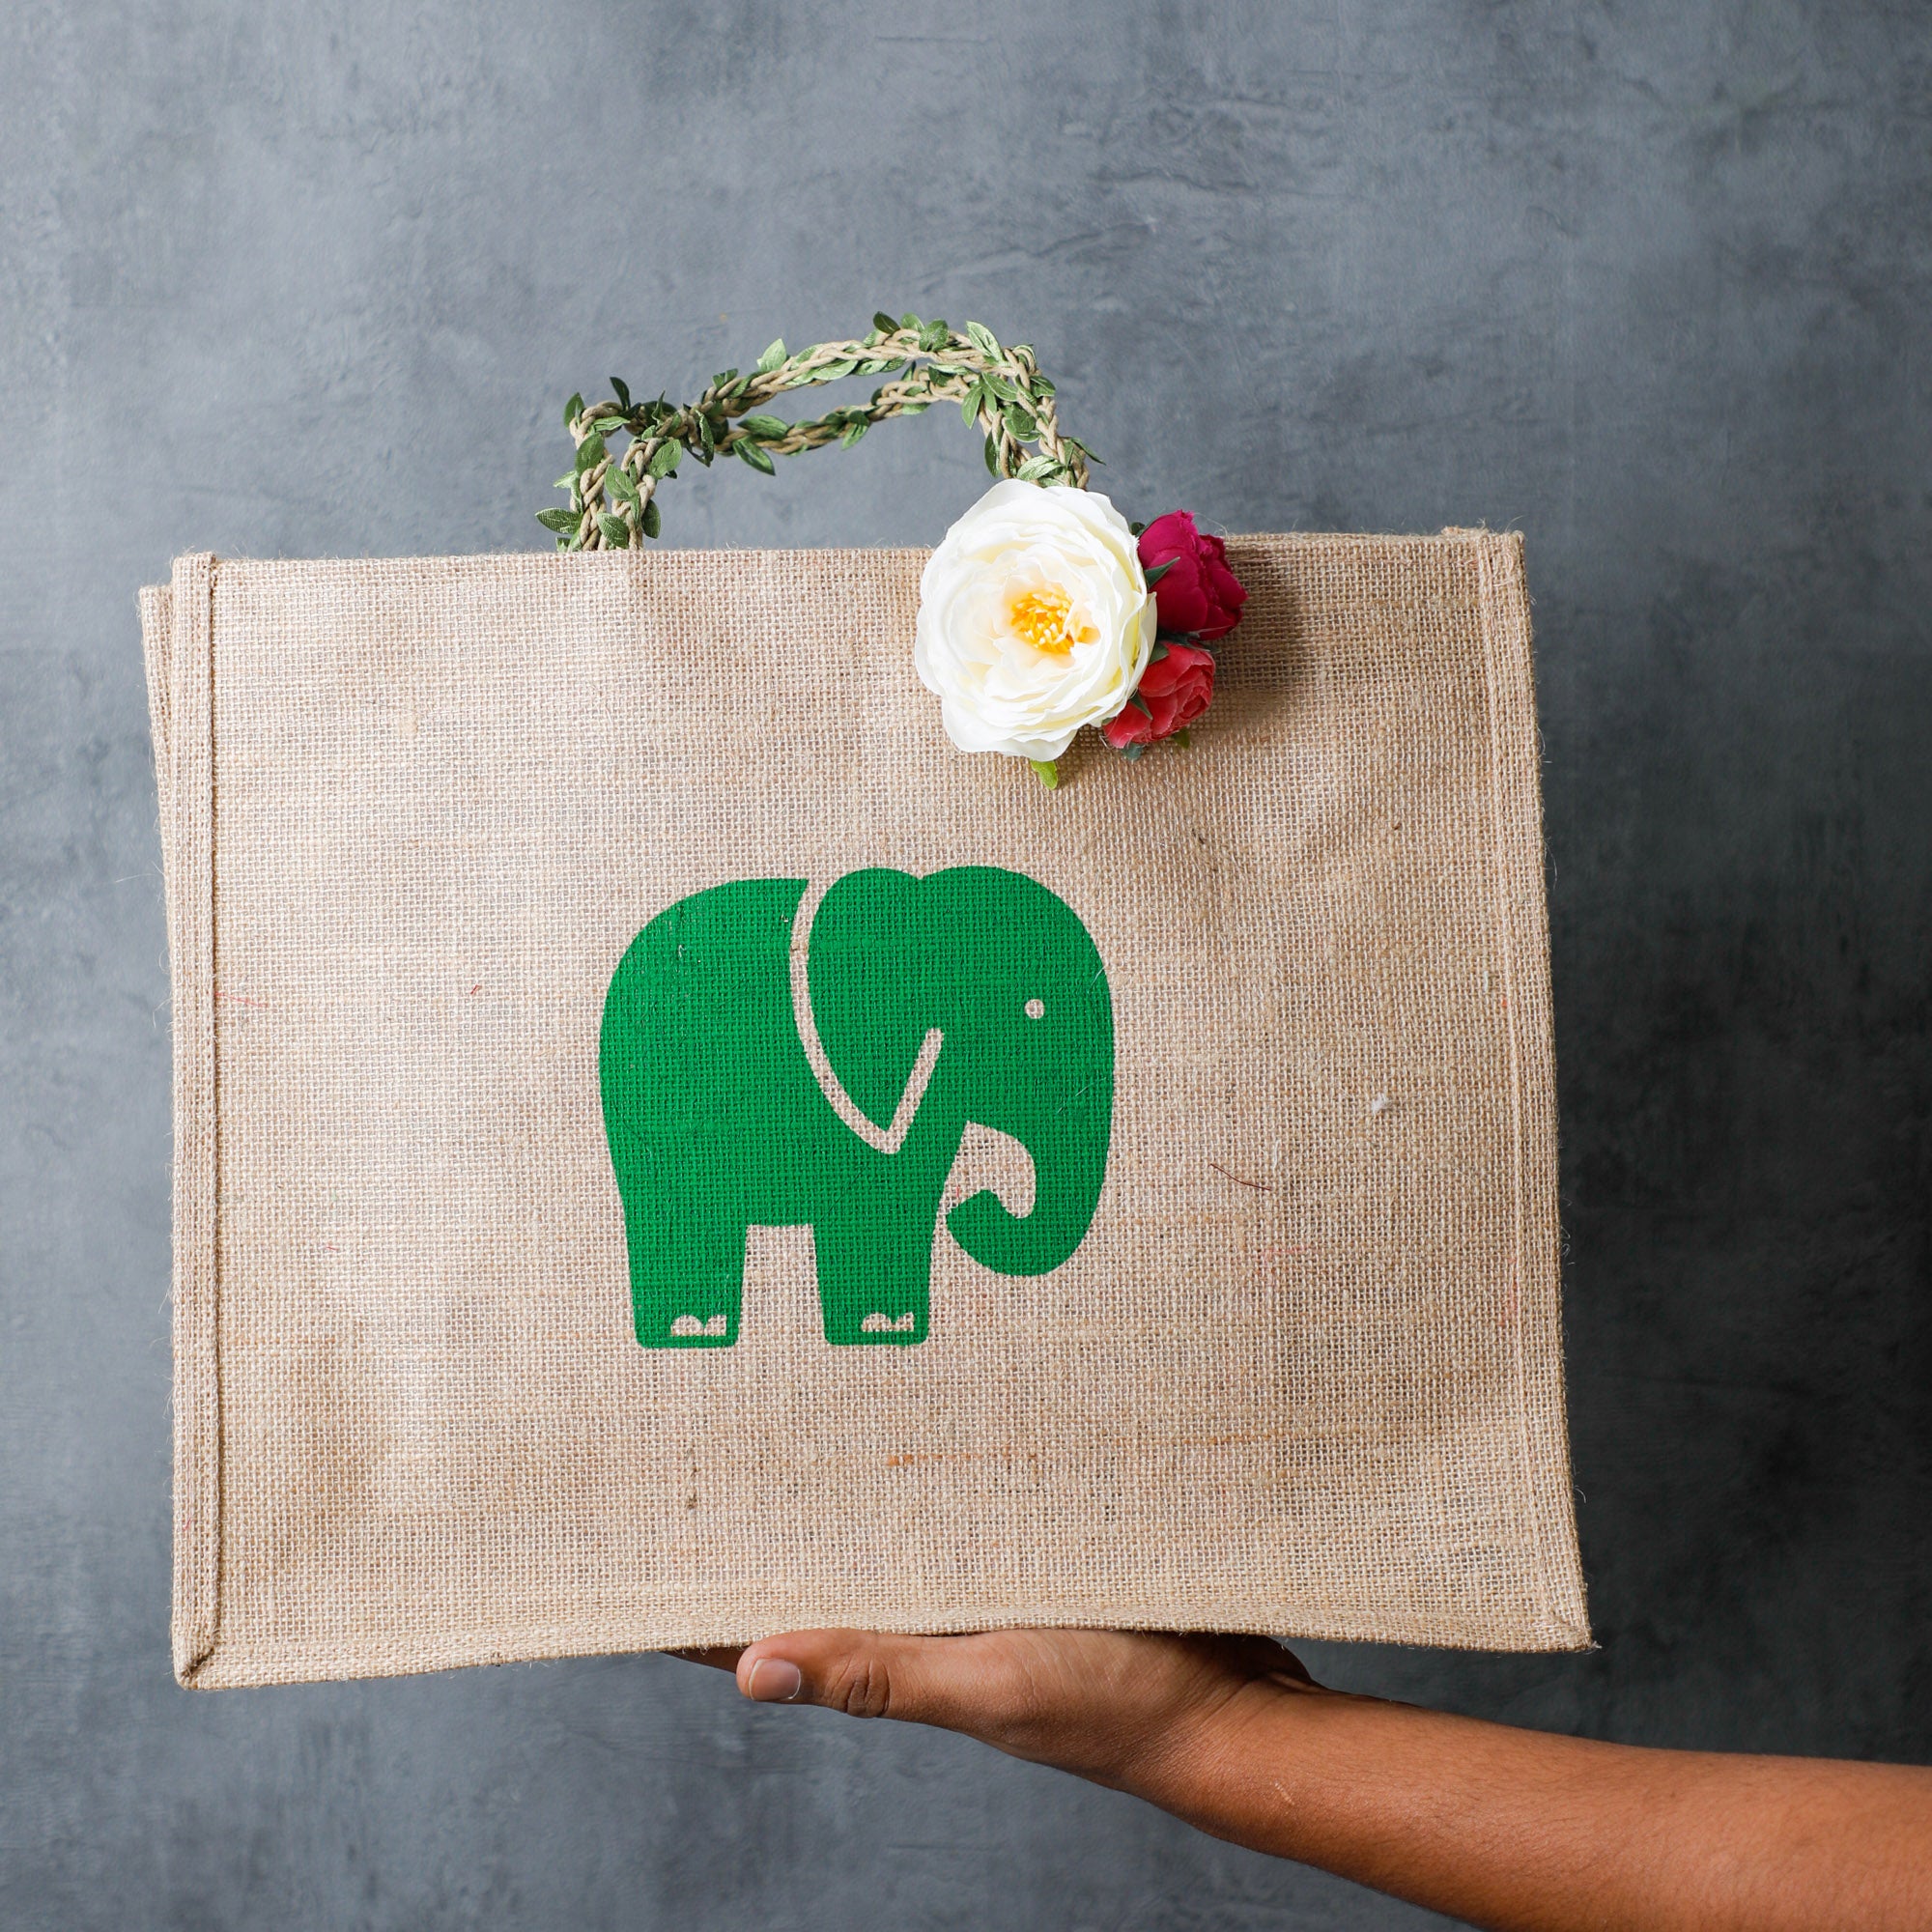 This jute bag is both Eco-friendly and stylish.